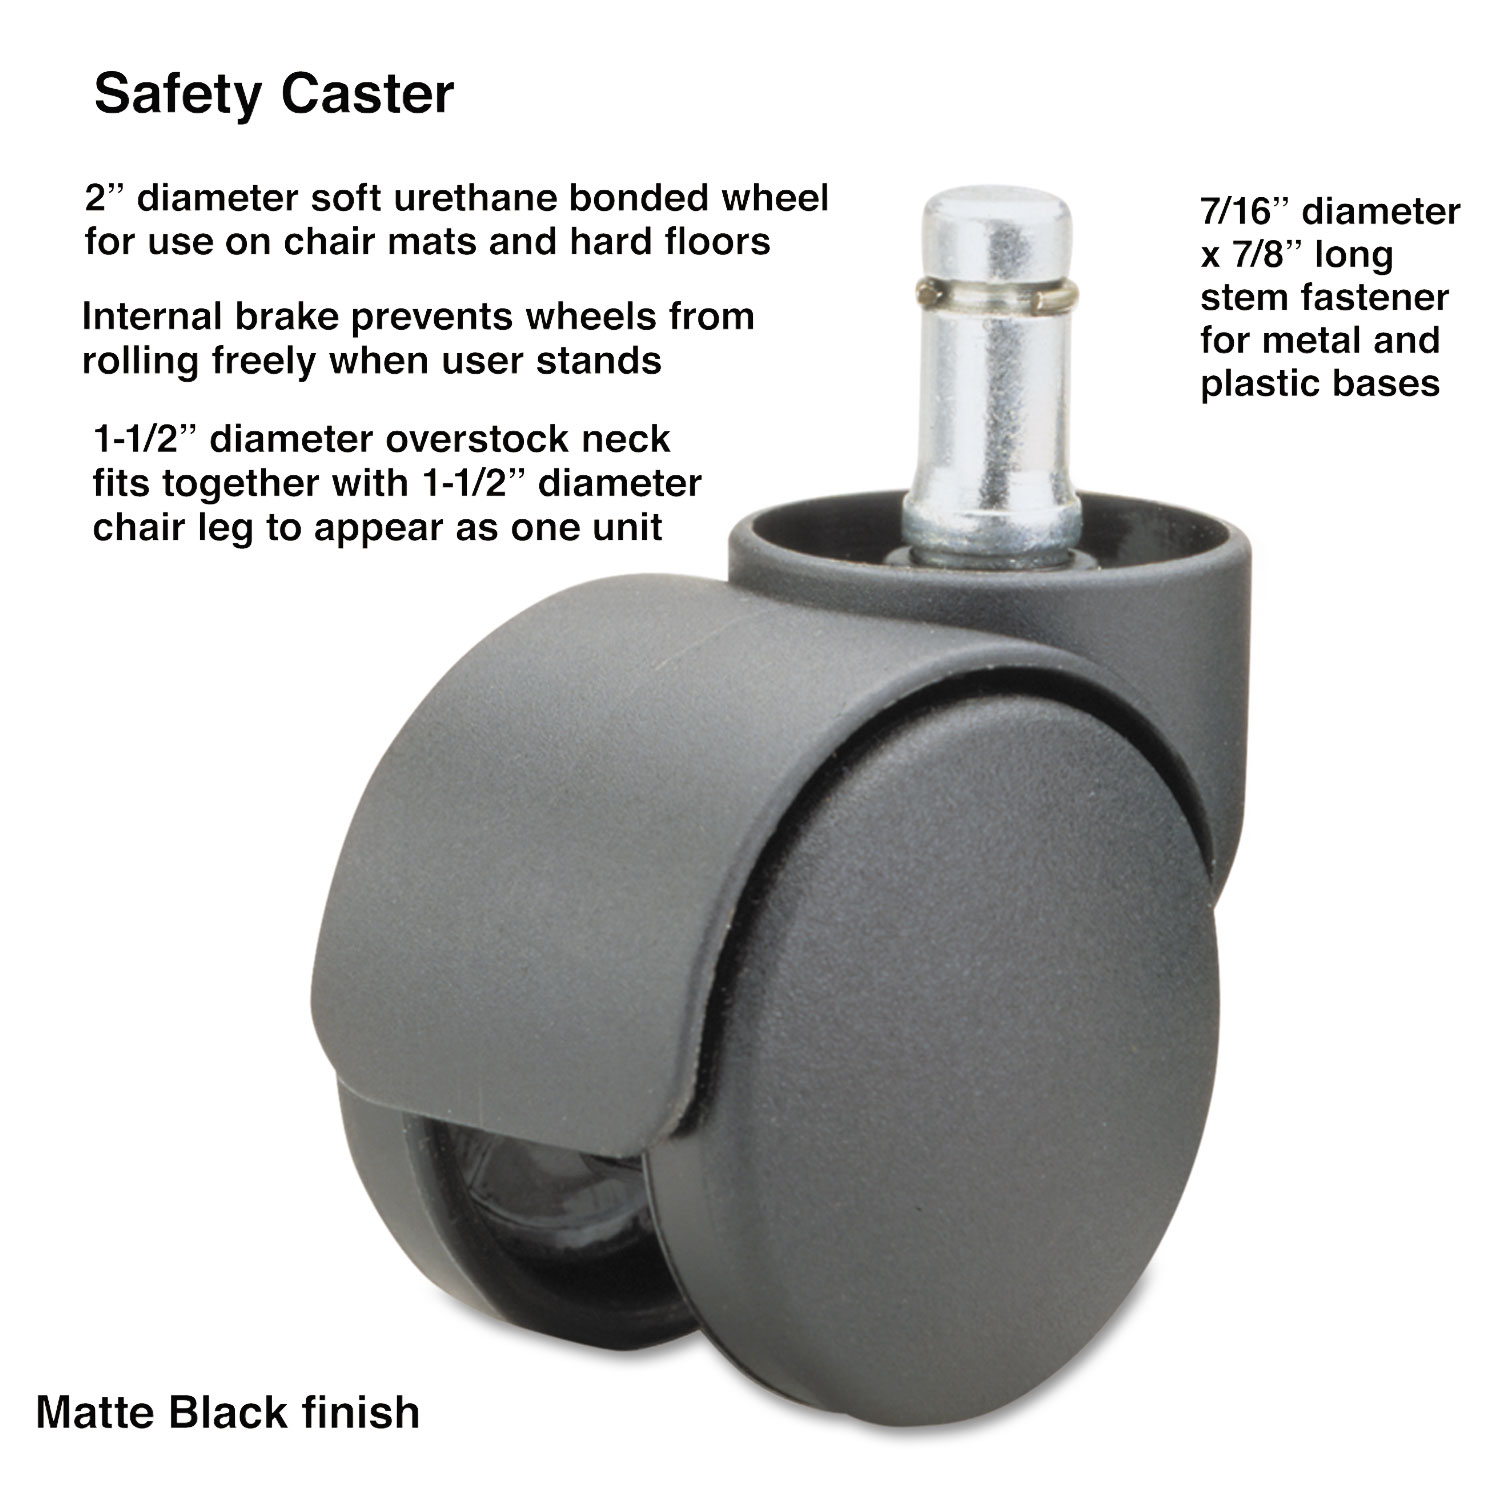 Safety Casters by Master Caster MAS TimeSupplies